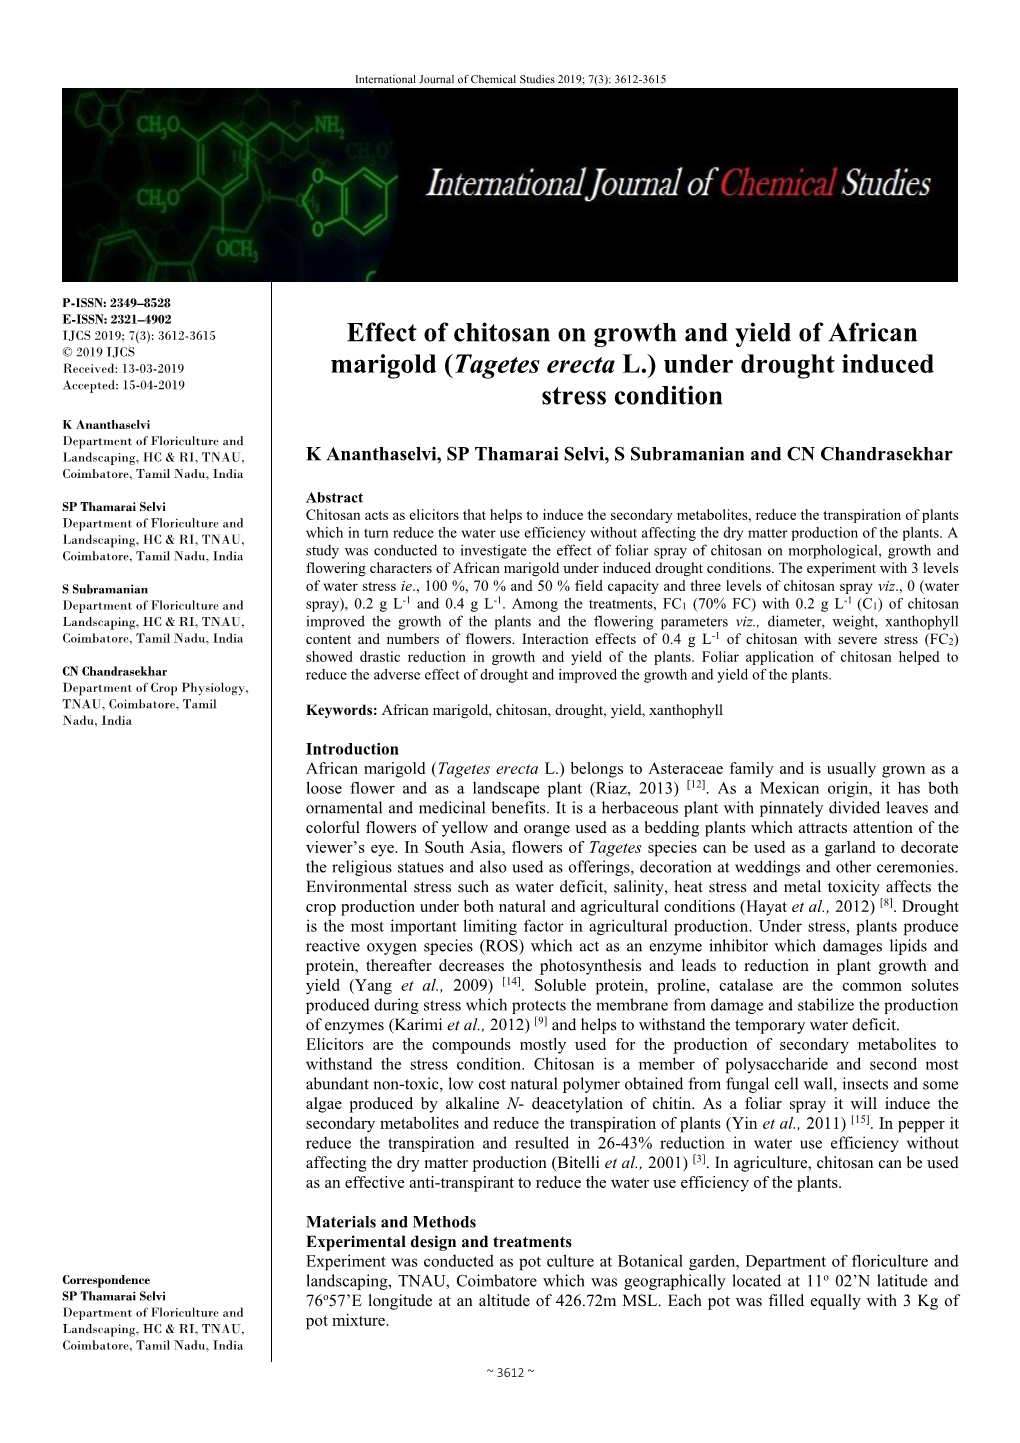 Effect of Chitosan on Growth and Yield of African Marigold (Tagetes Erecta L.) Under Drought Induced Stress Condition